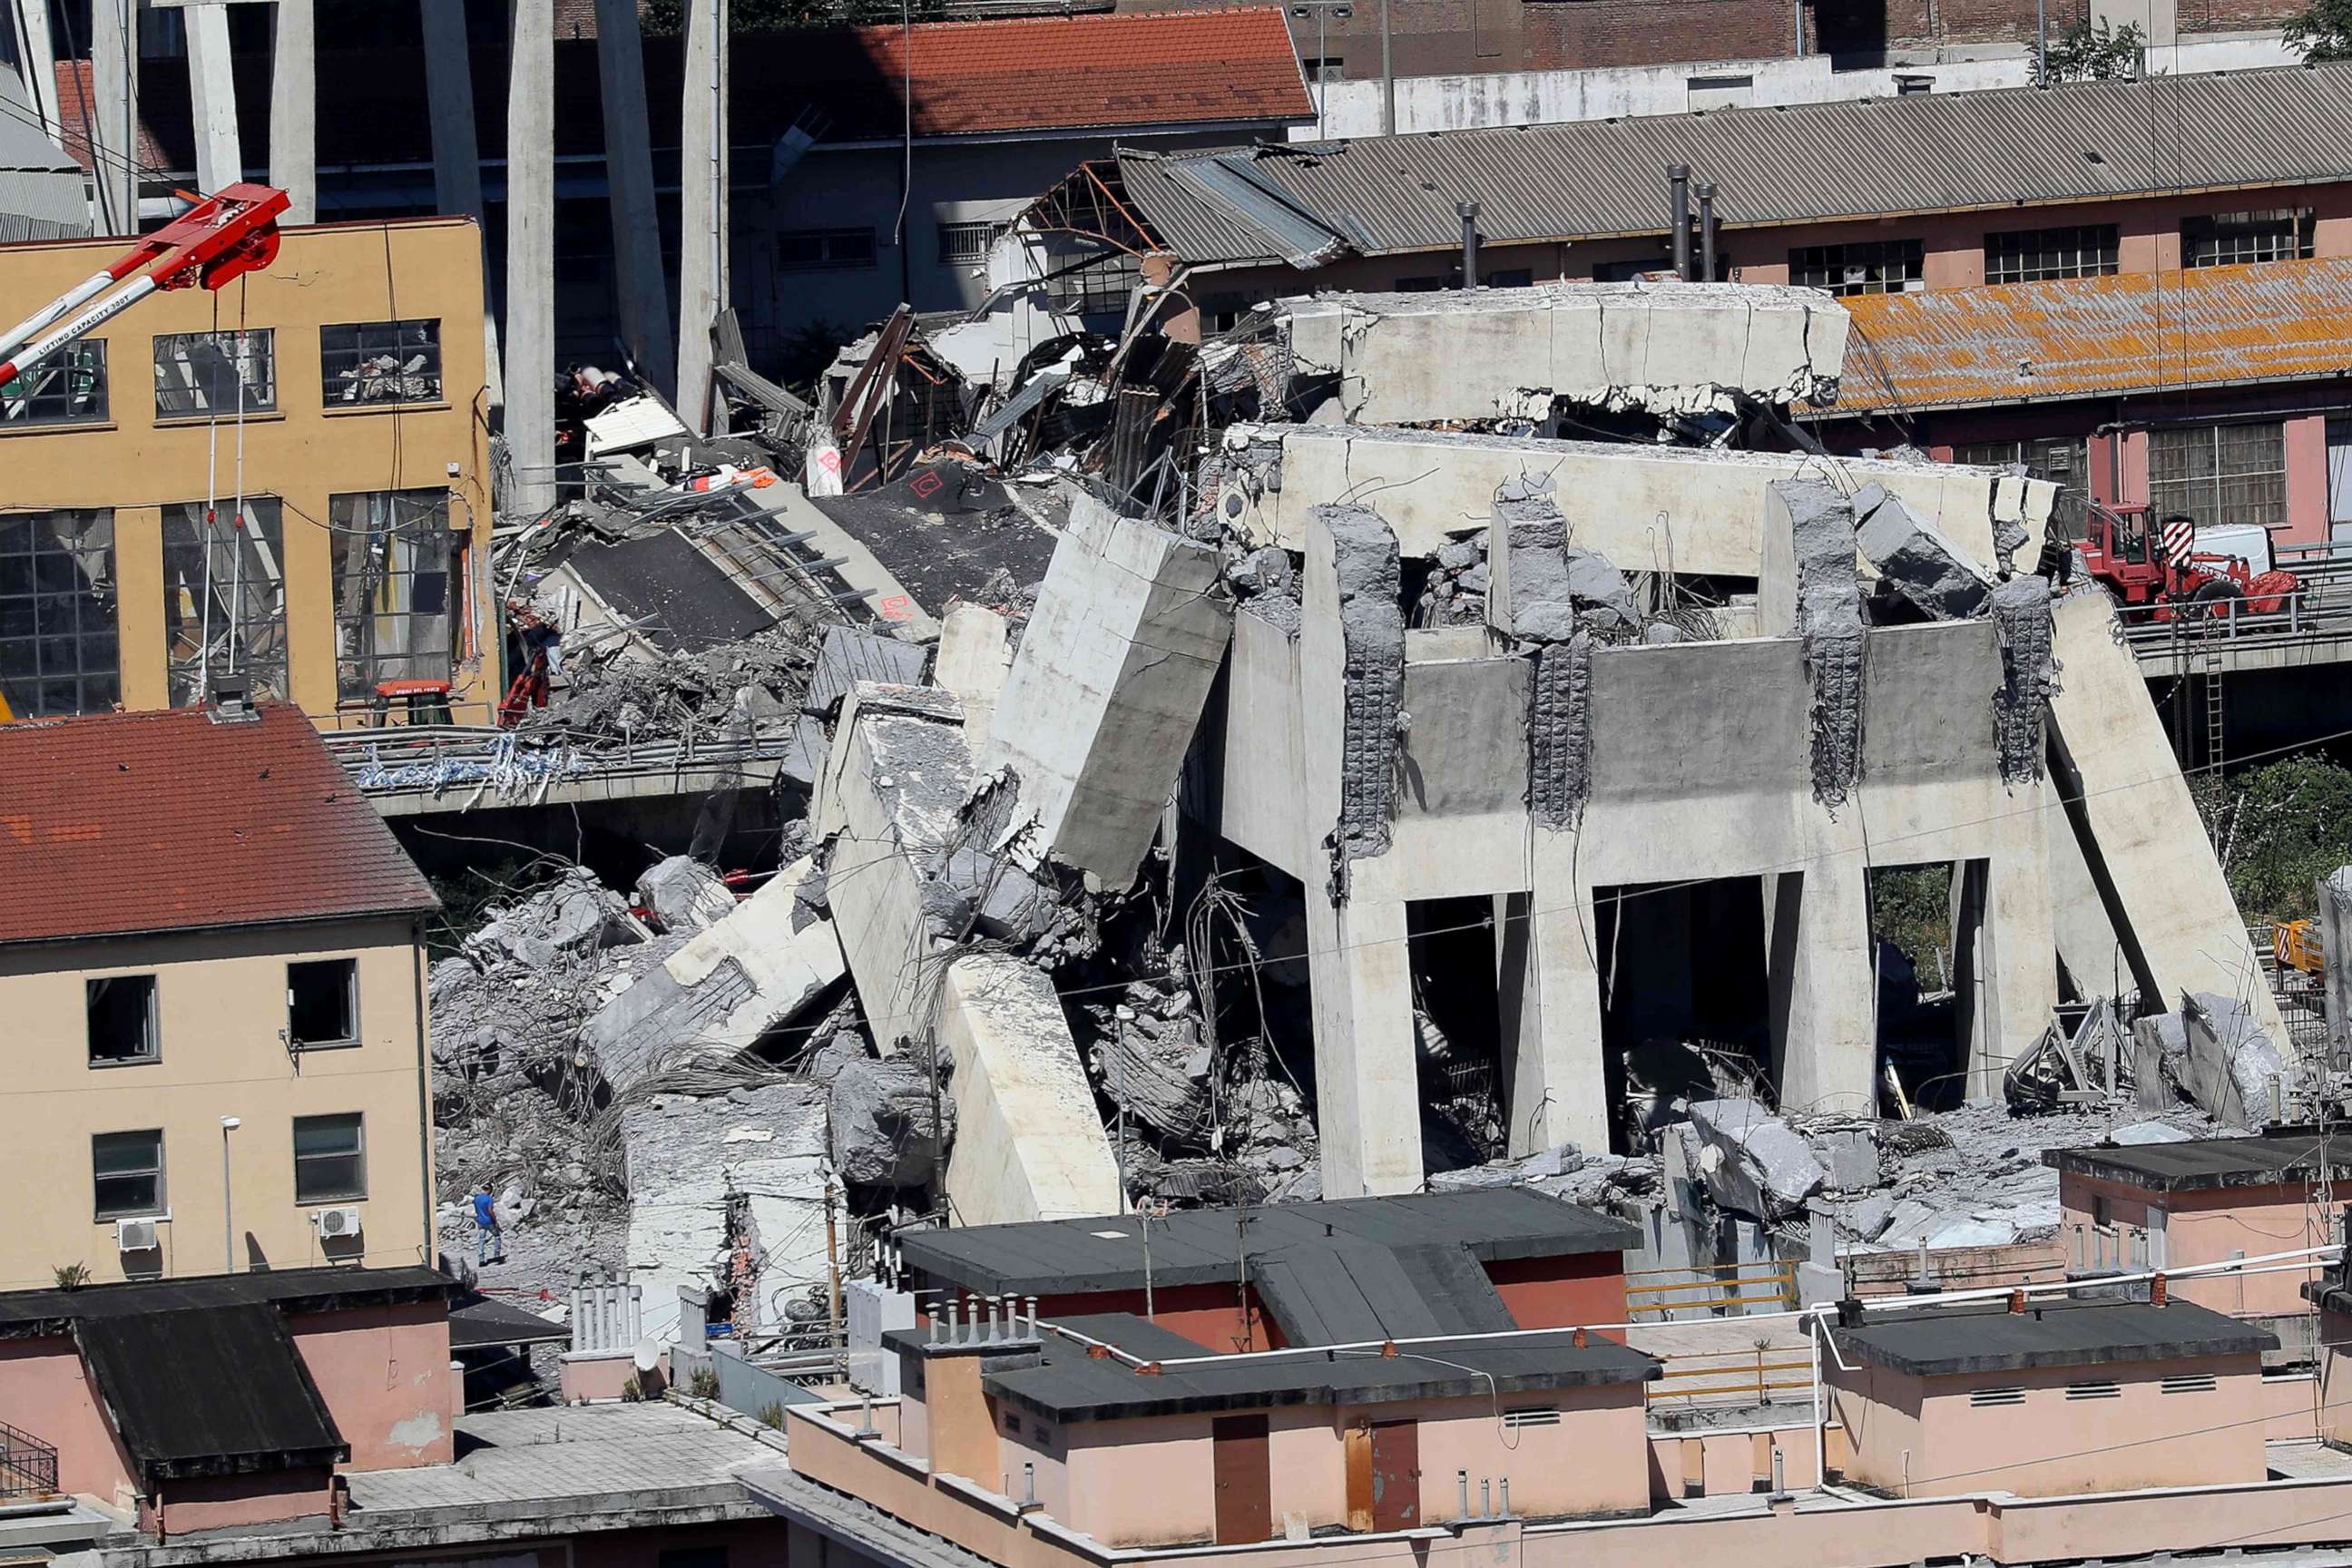 PHOTO: Rubble of the collapsed section of the Morandi bridge the day after the accident Genoa, Italy, Aug, 15, 2018.